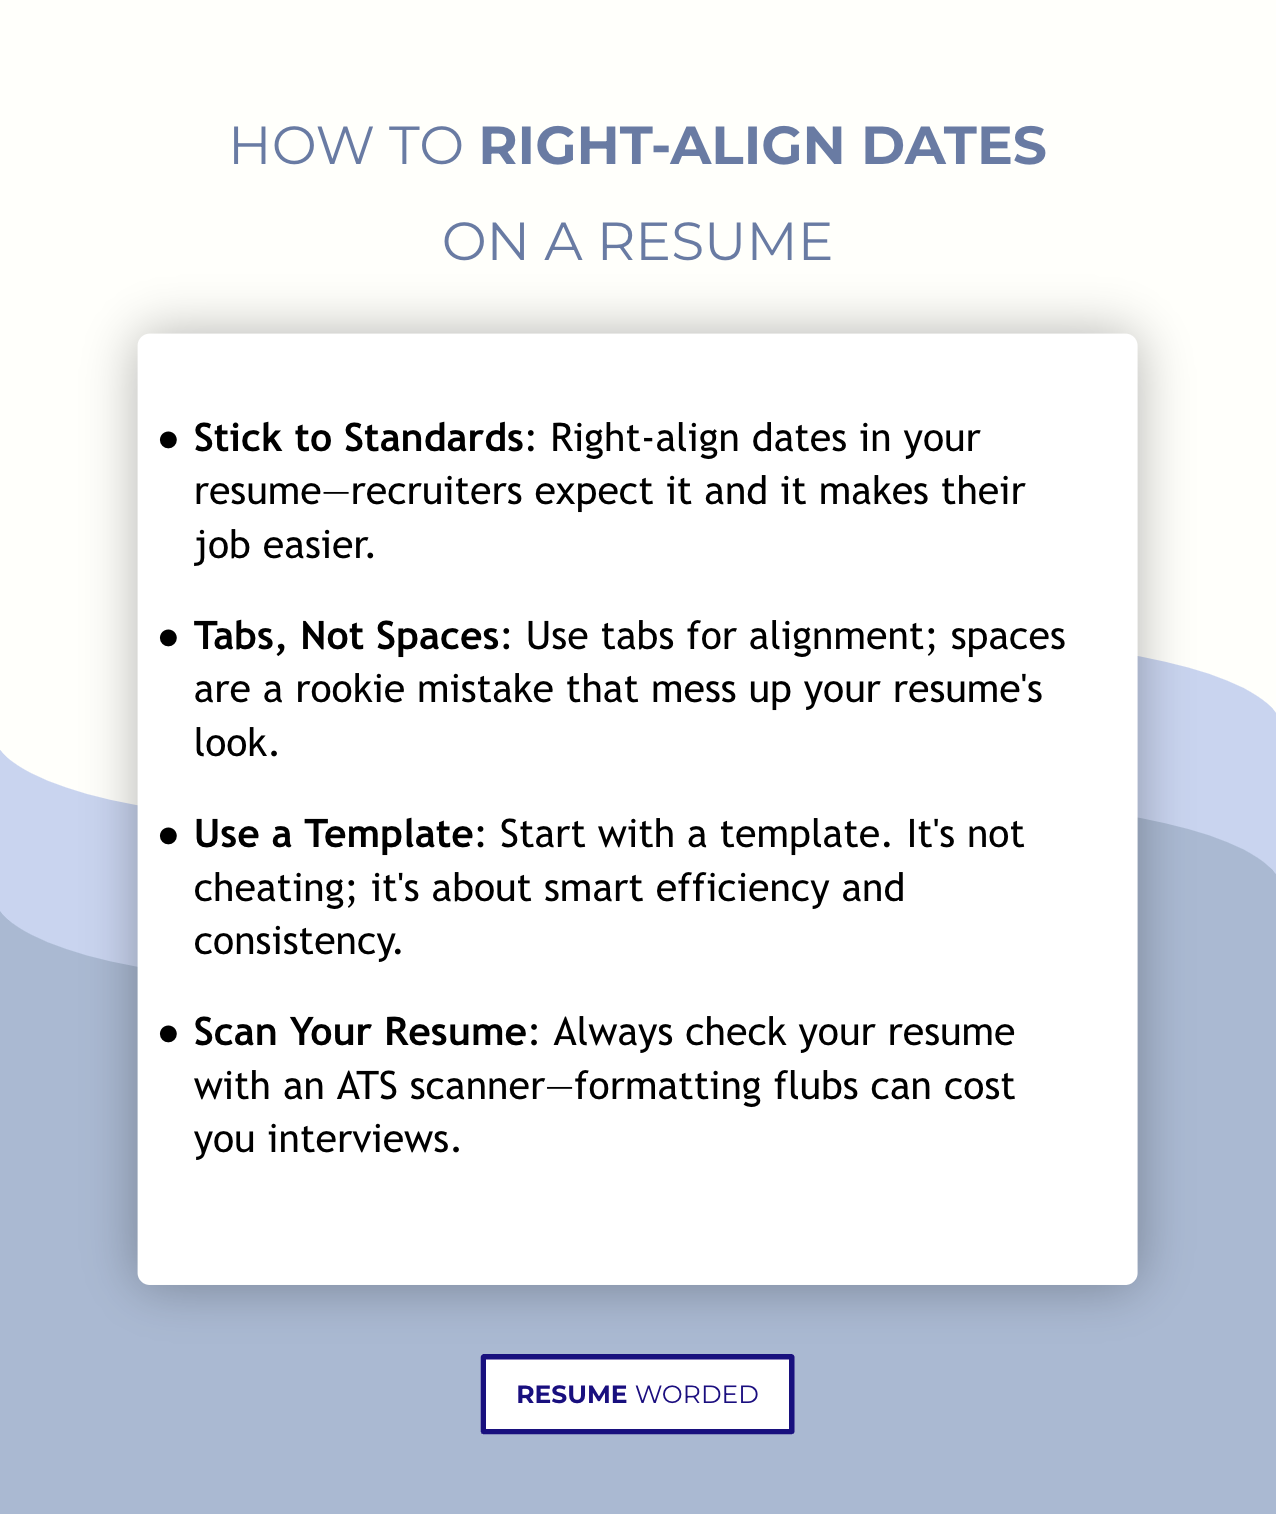 Key advice to remember about right-aligning dates on your resume